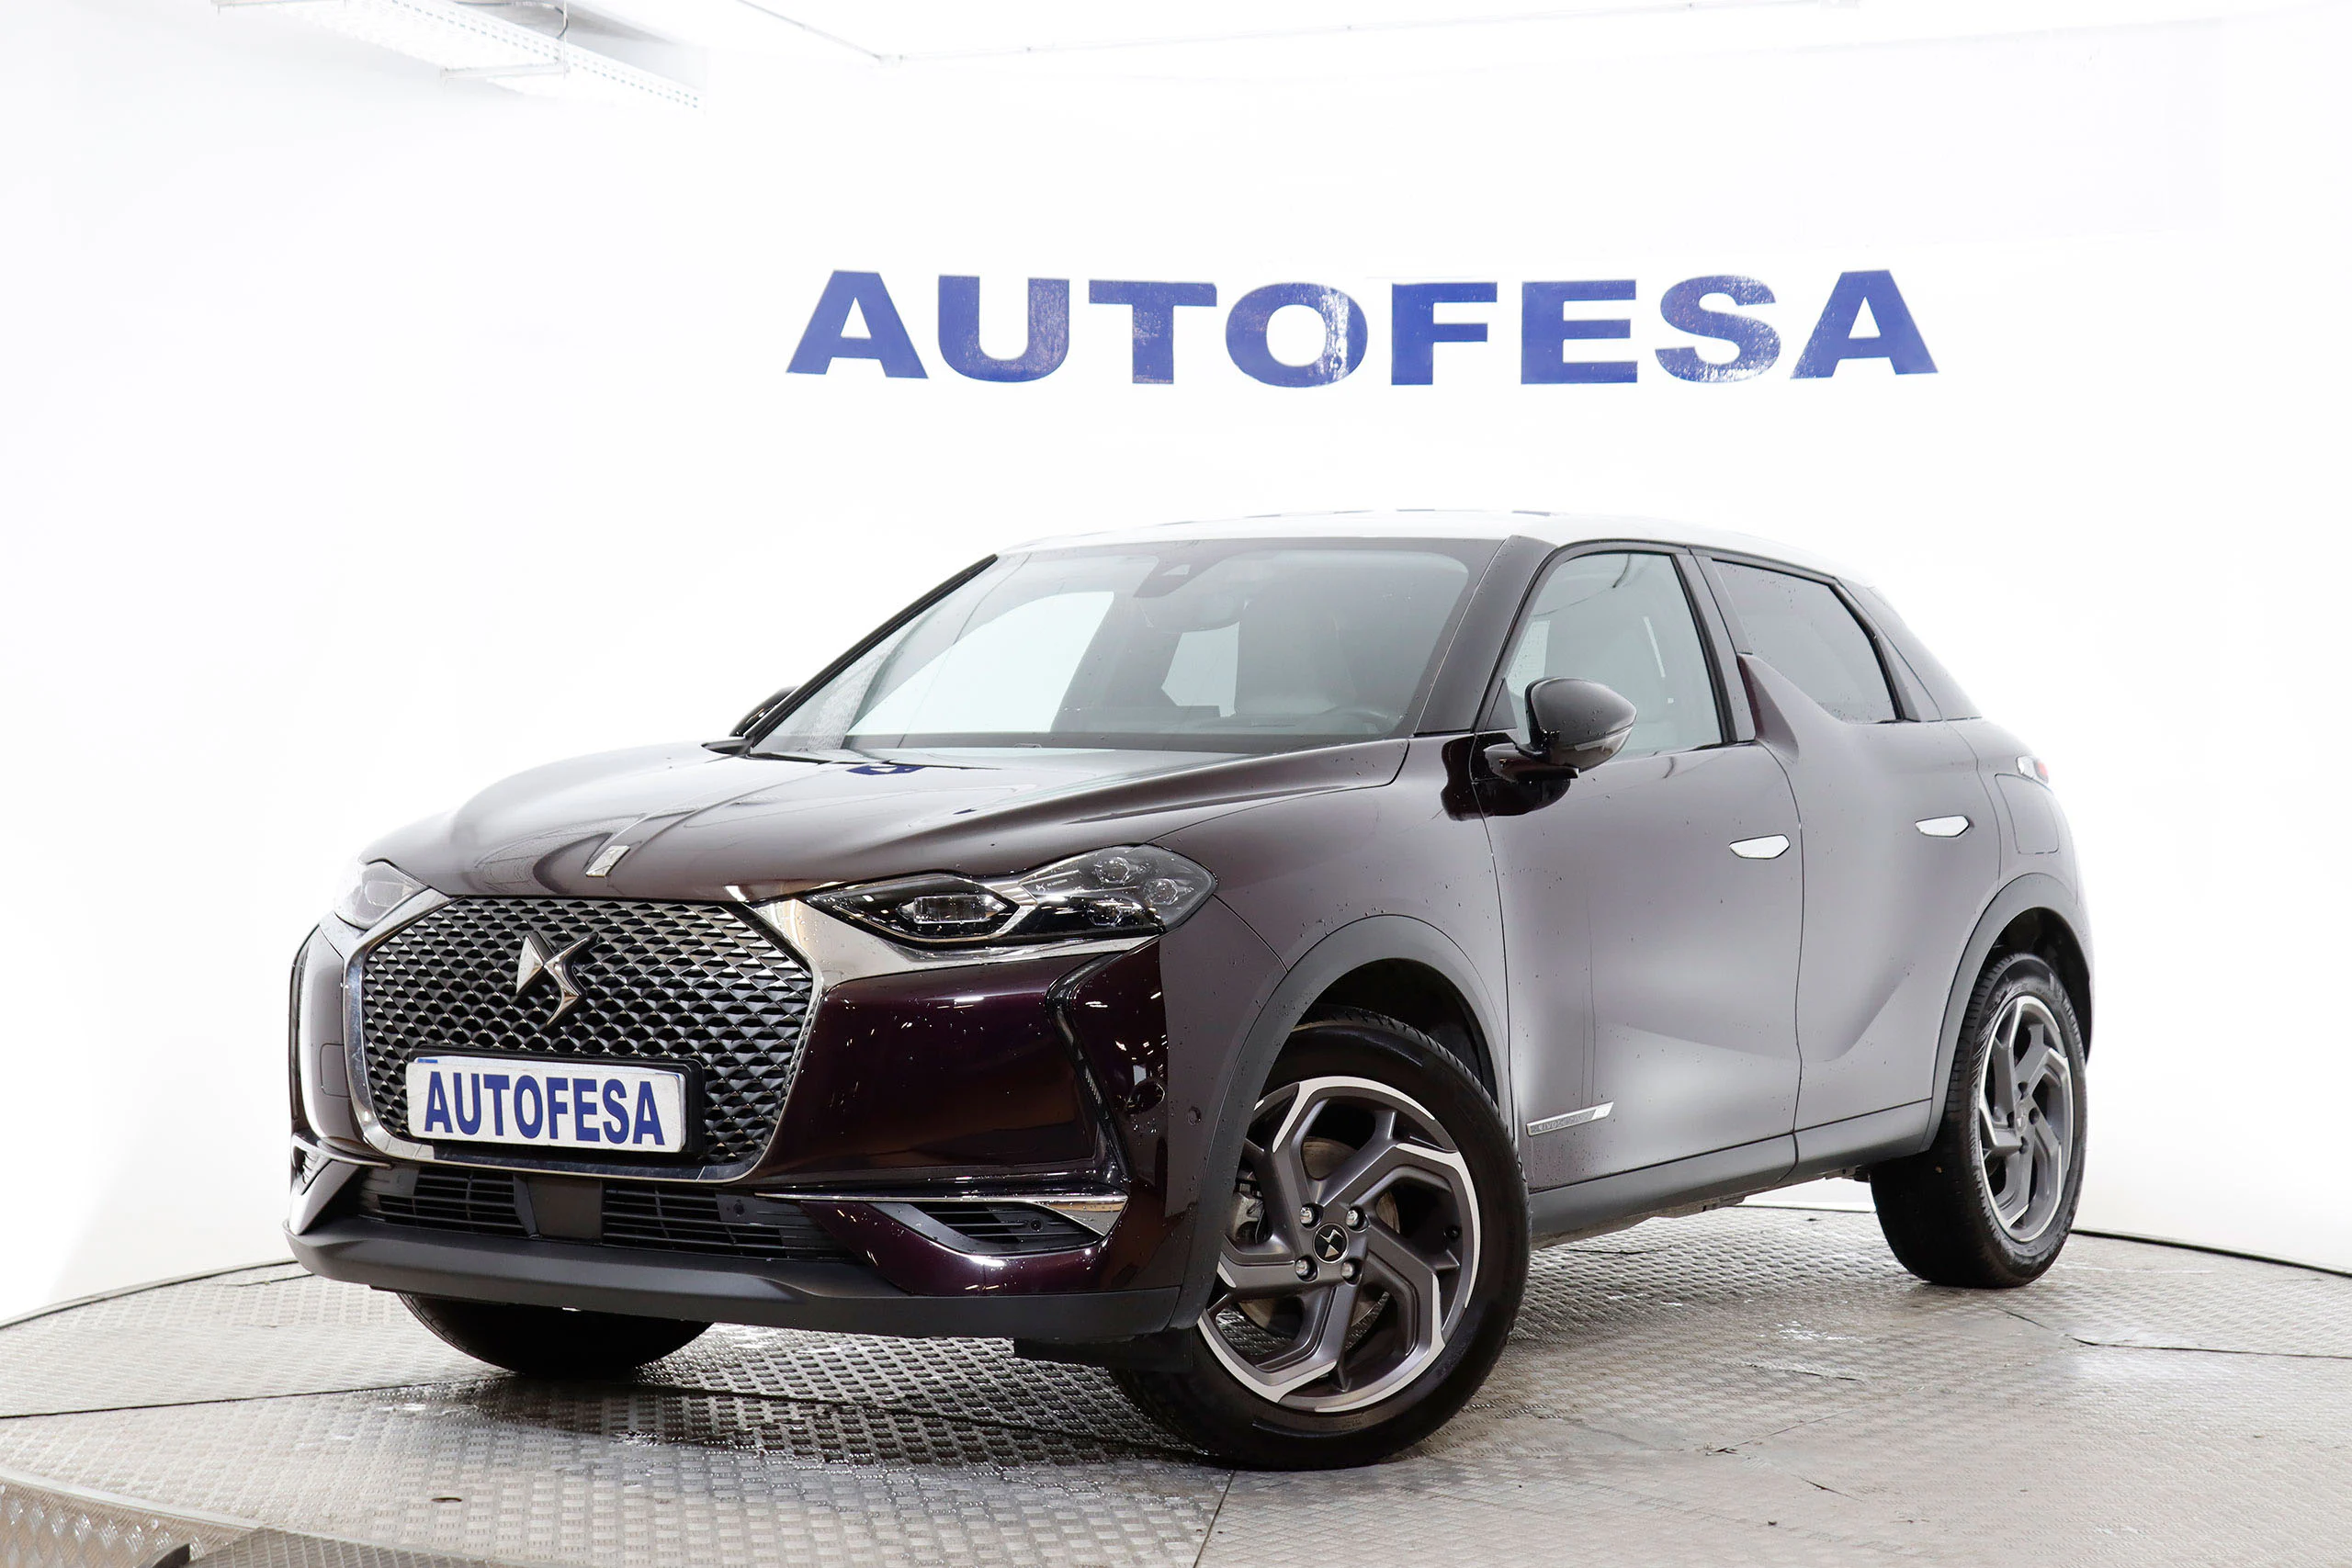 DS DS 3 Crossback 1.2 Grand Chic 130cv Auto 5P S/S # NAVY, FAROS LED - Foto 1